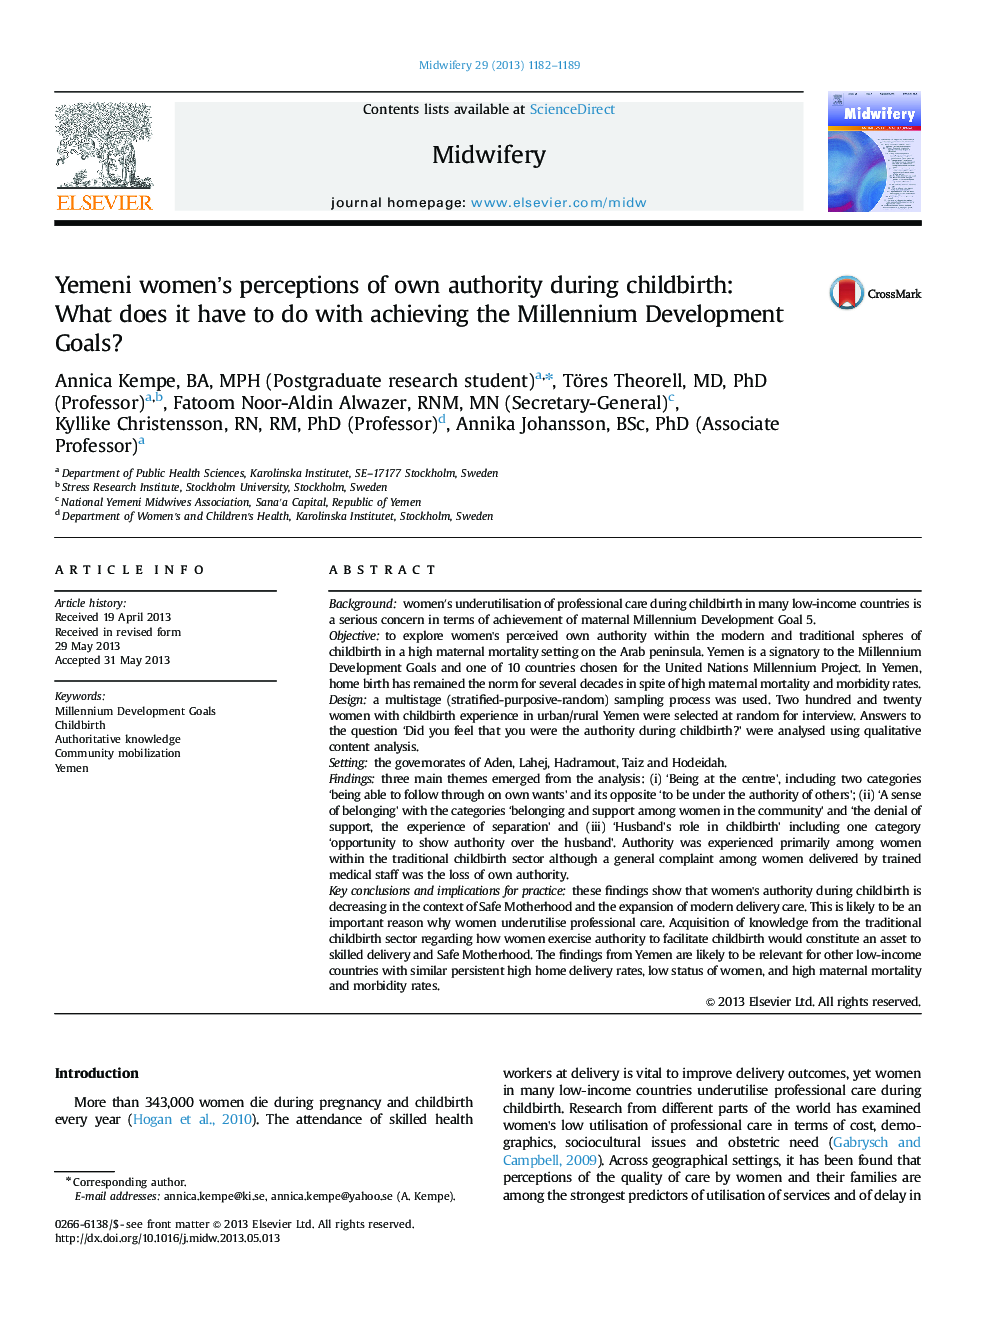 Yemeni women's perceptions of own authority during childbirth: What does it have to do with achieving the Millennium Development Goals?